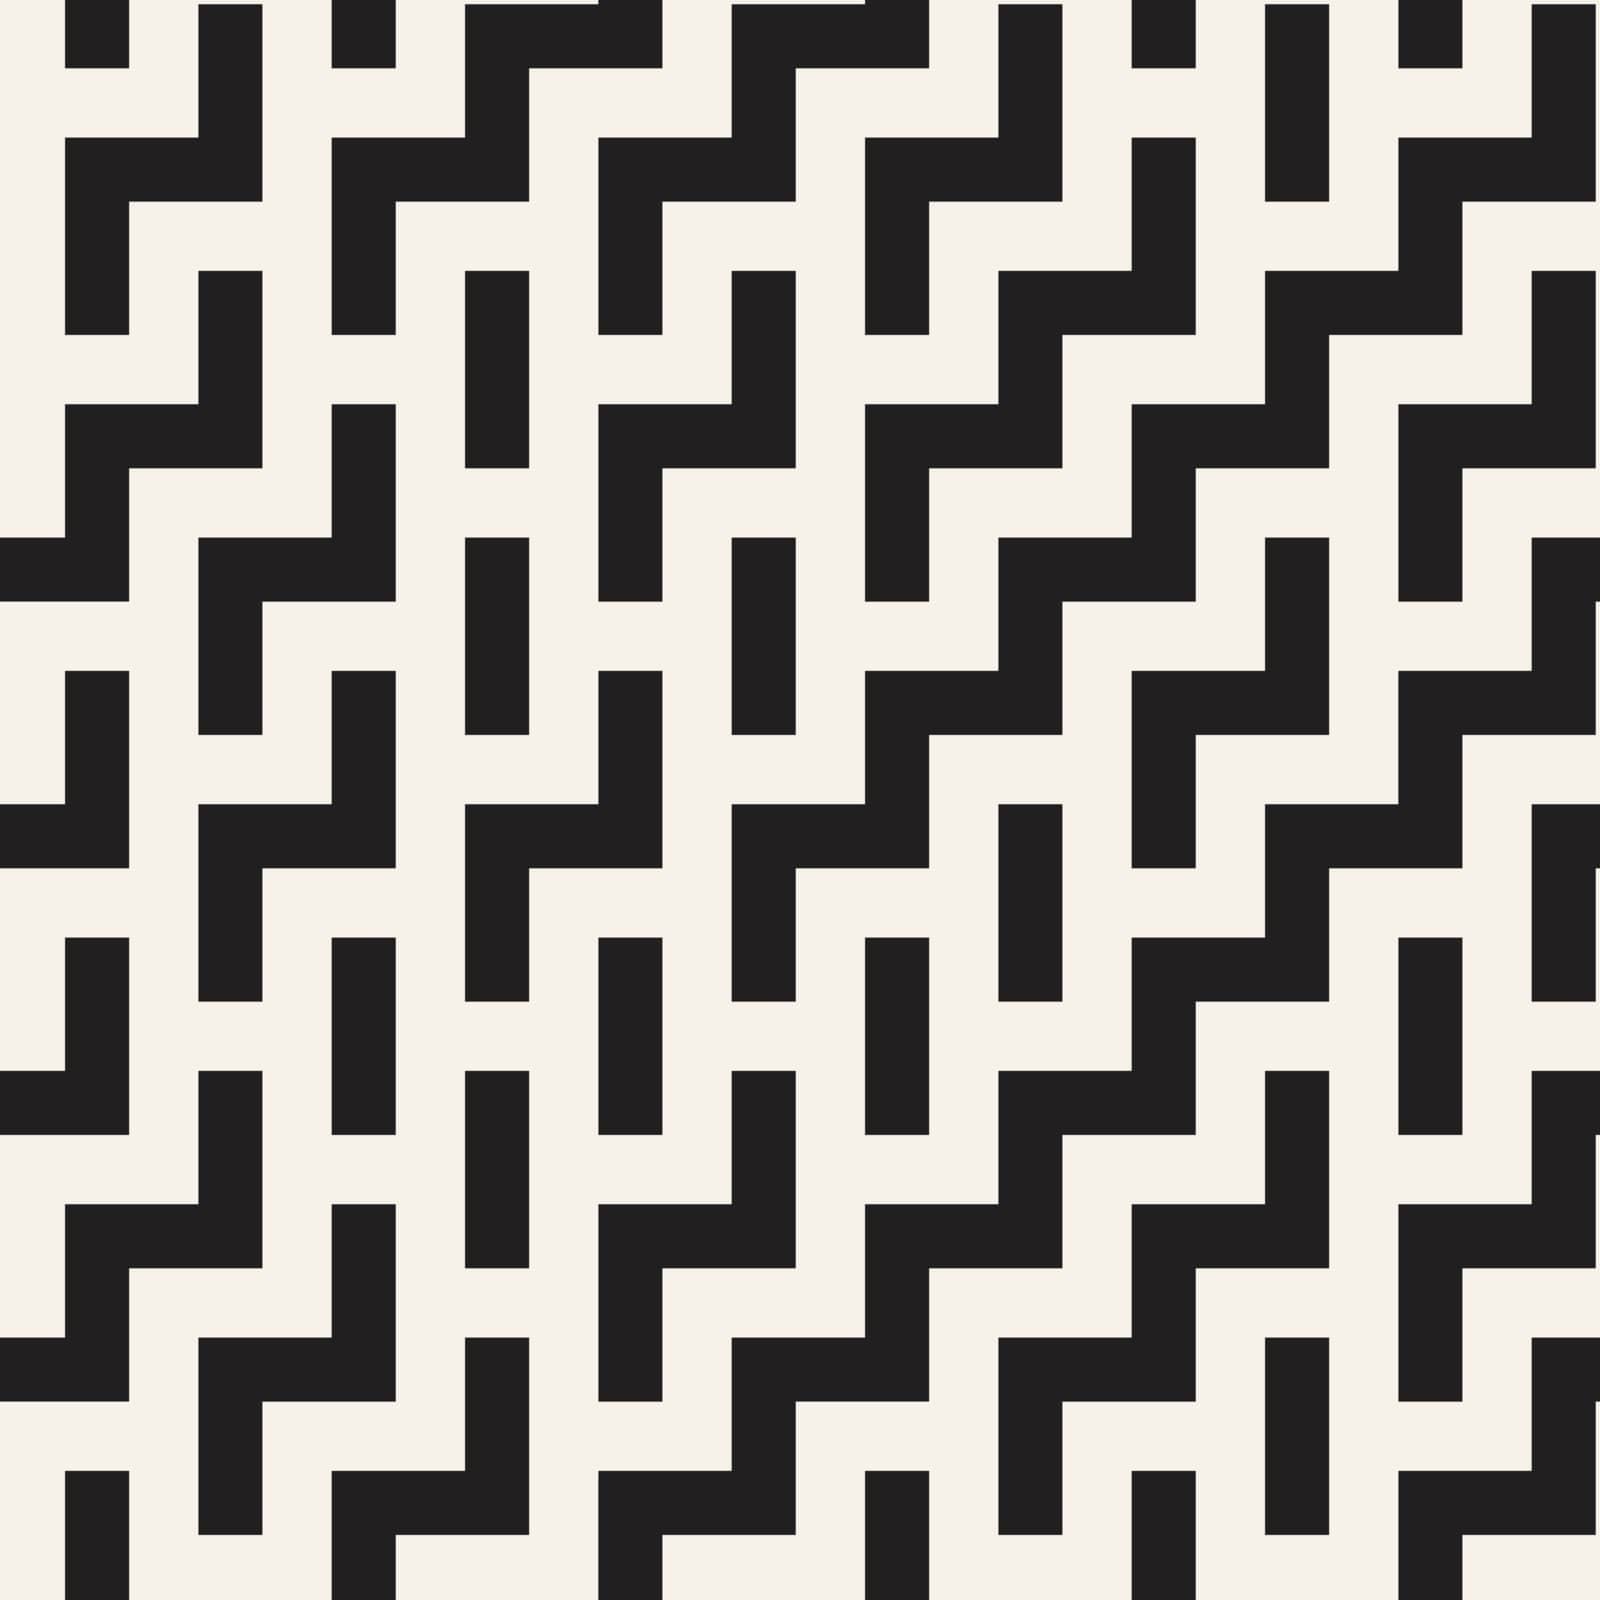 Irregular Maze Shapes Tiling Contemporary Graphic Design. Vector Seamless Black and White Pattern by Samolevsky